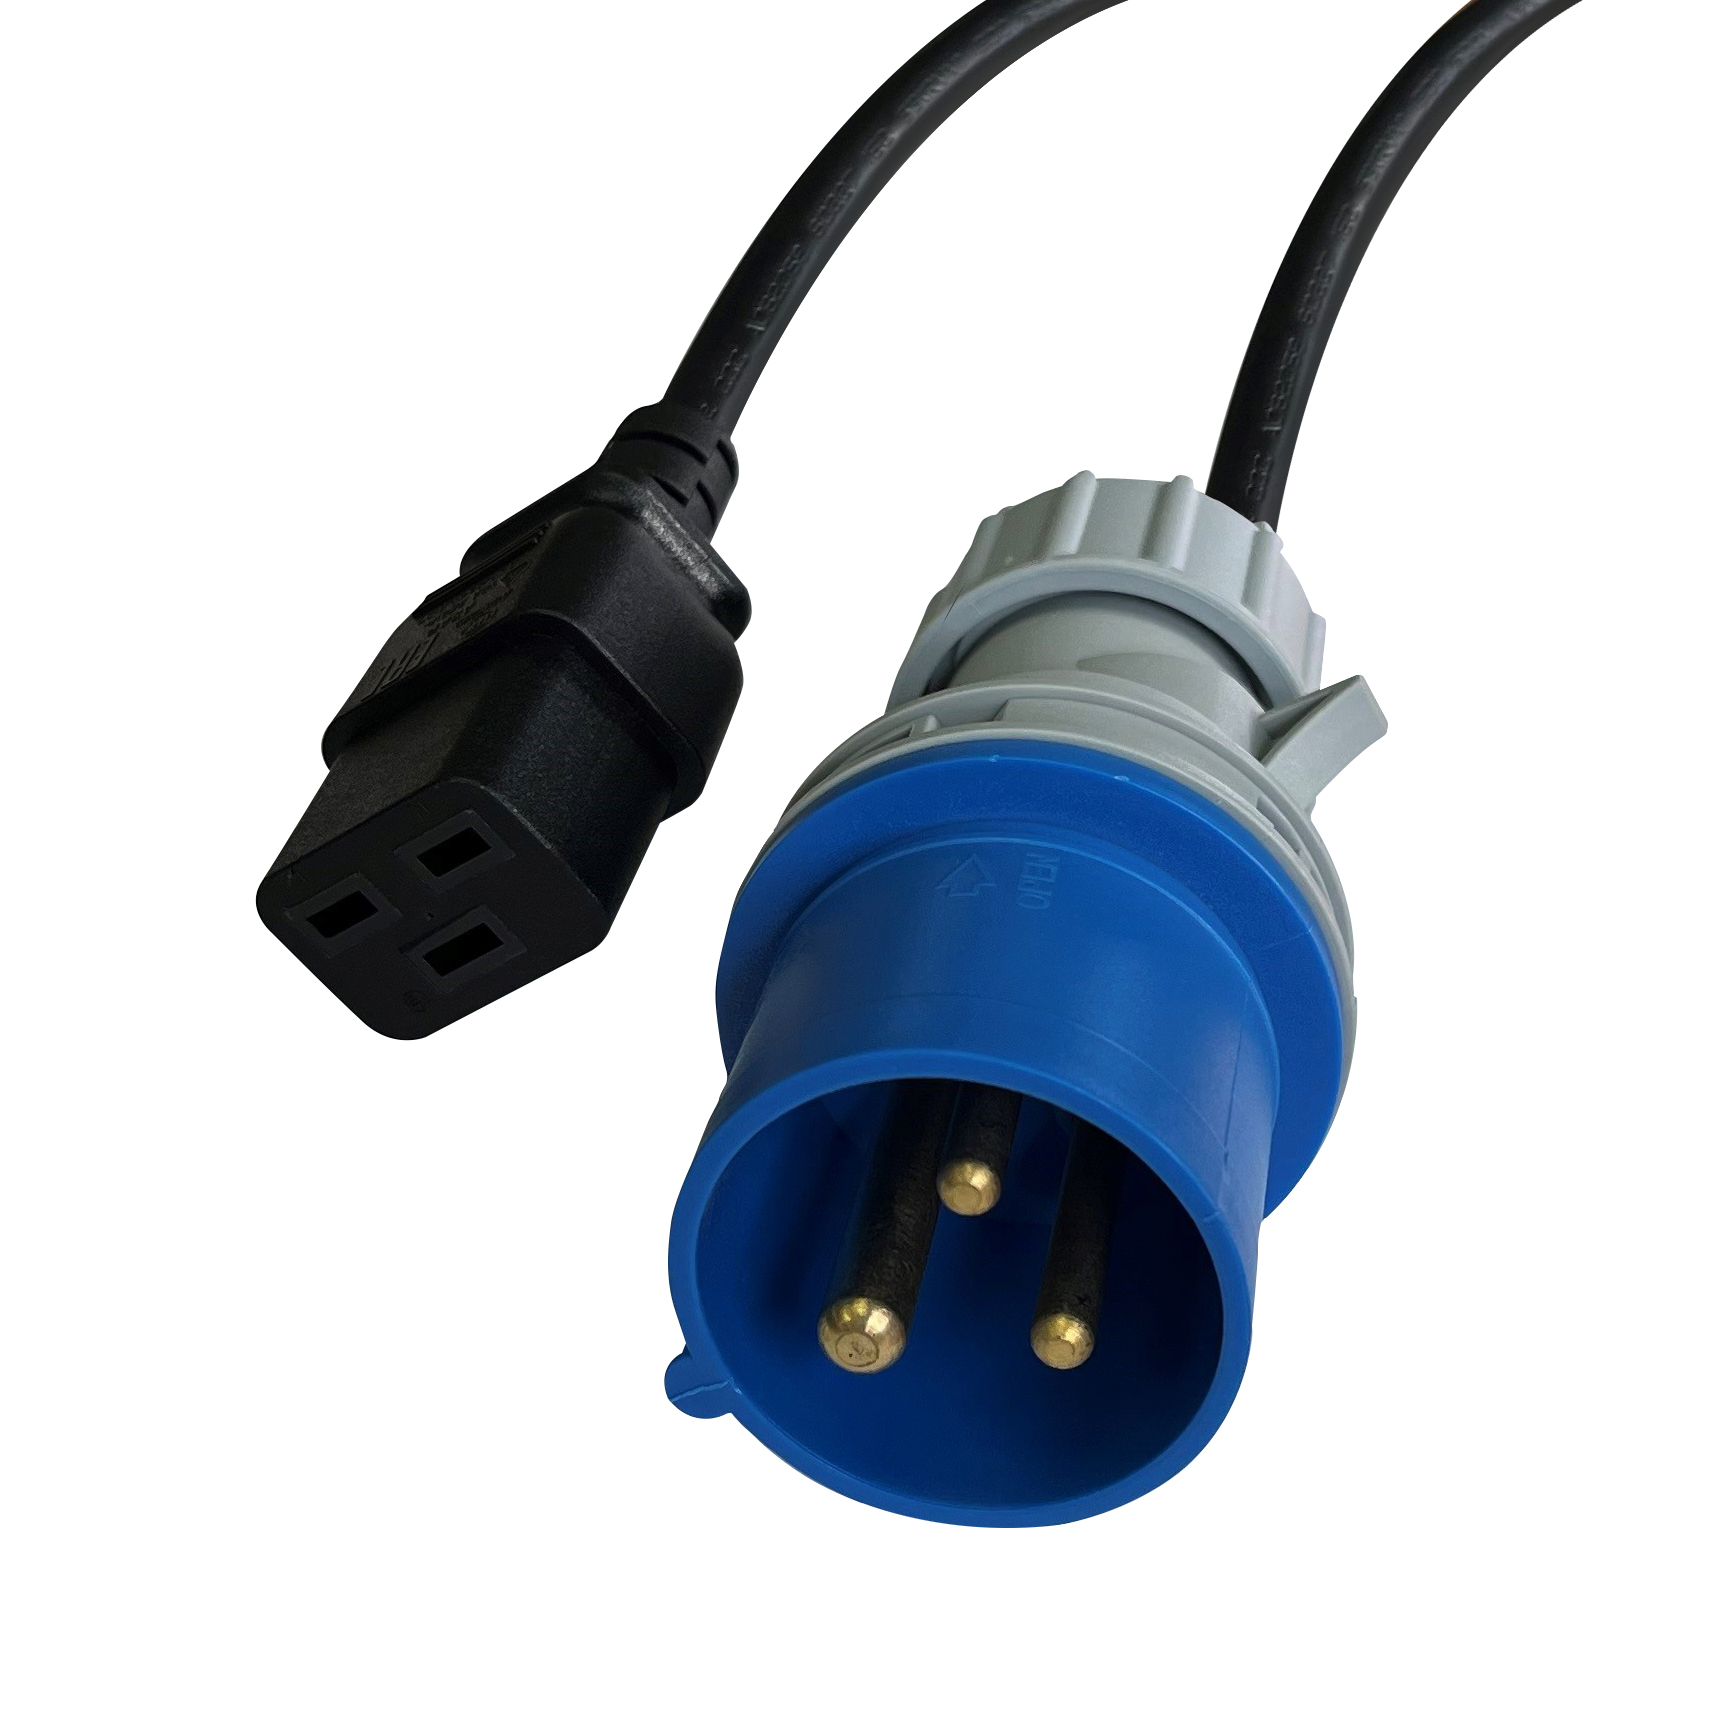 16 Amp Commando to C19 Power Cable